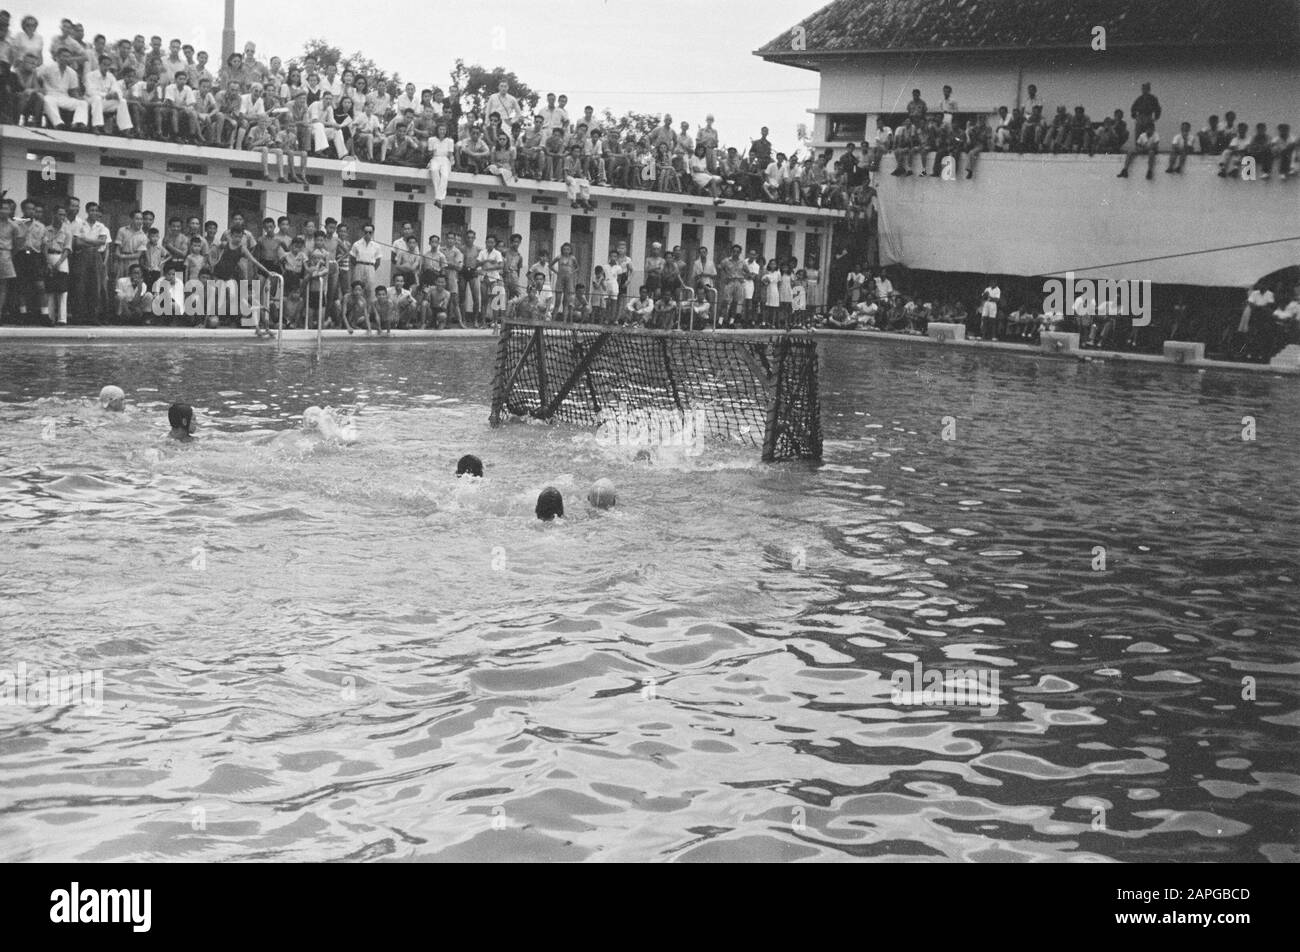 Water polo Description: Collection Photo collection Service for Army Contacts Indonesia, photon number 203-4-4 Date: april 1947 Location: Indonesia, Dutch East Indies Stock Photo